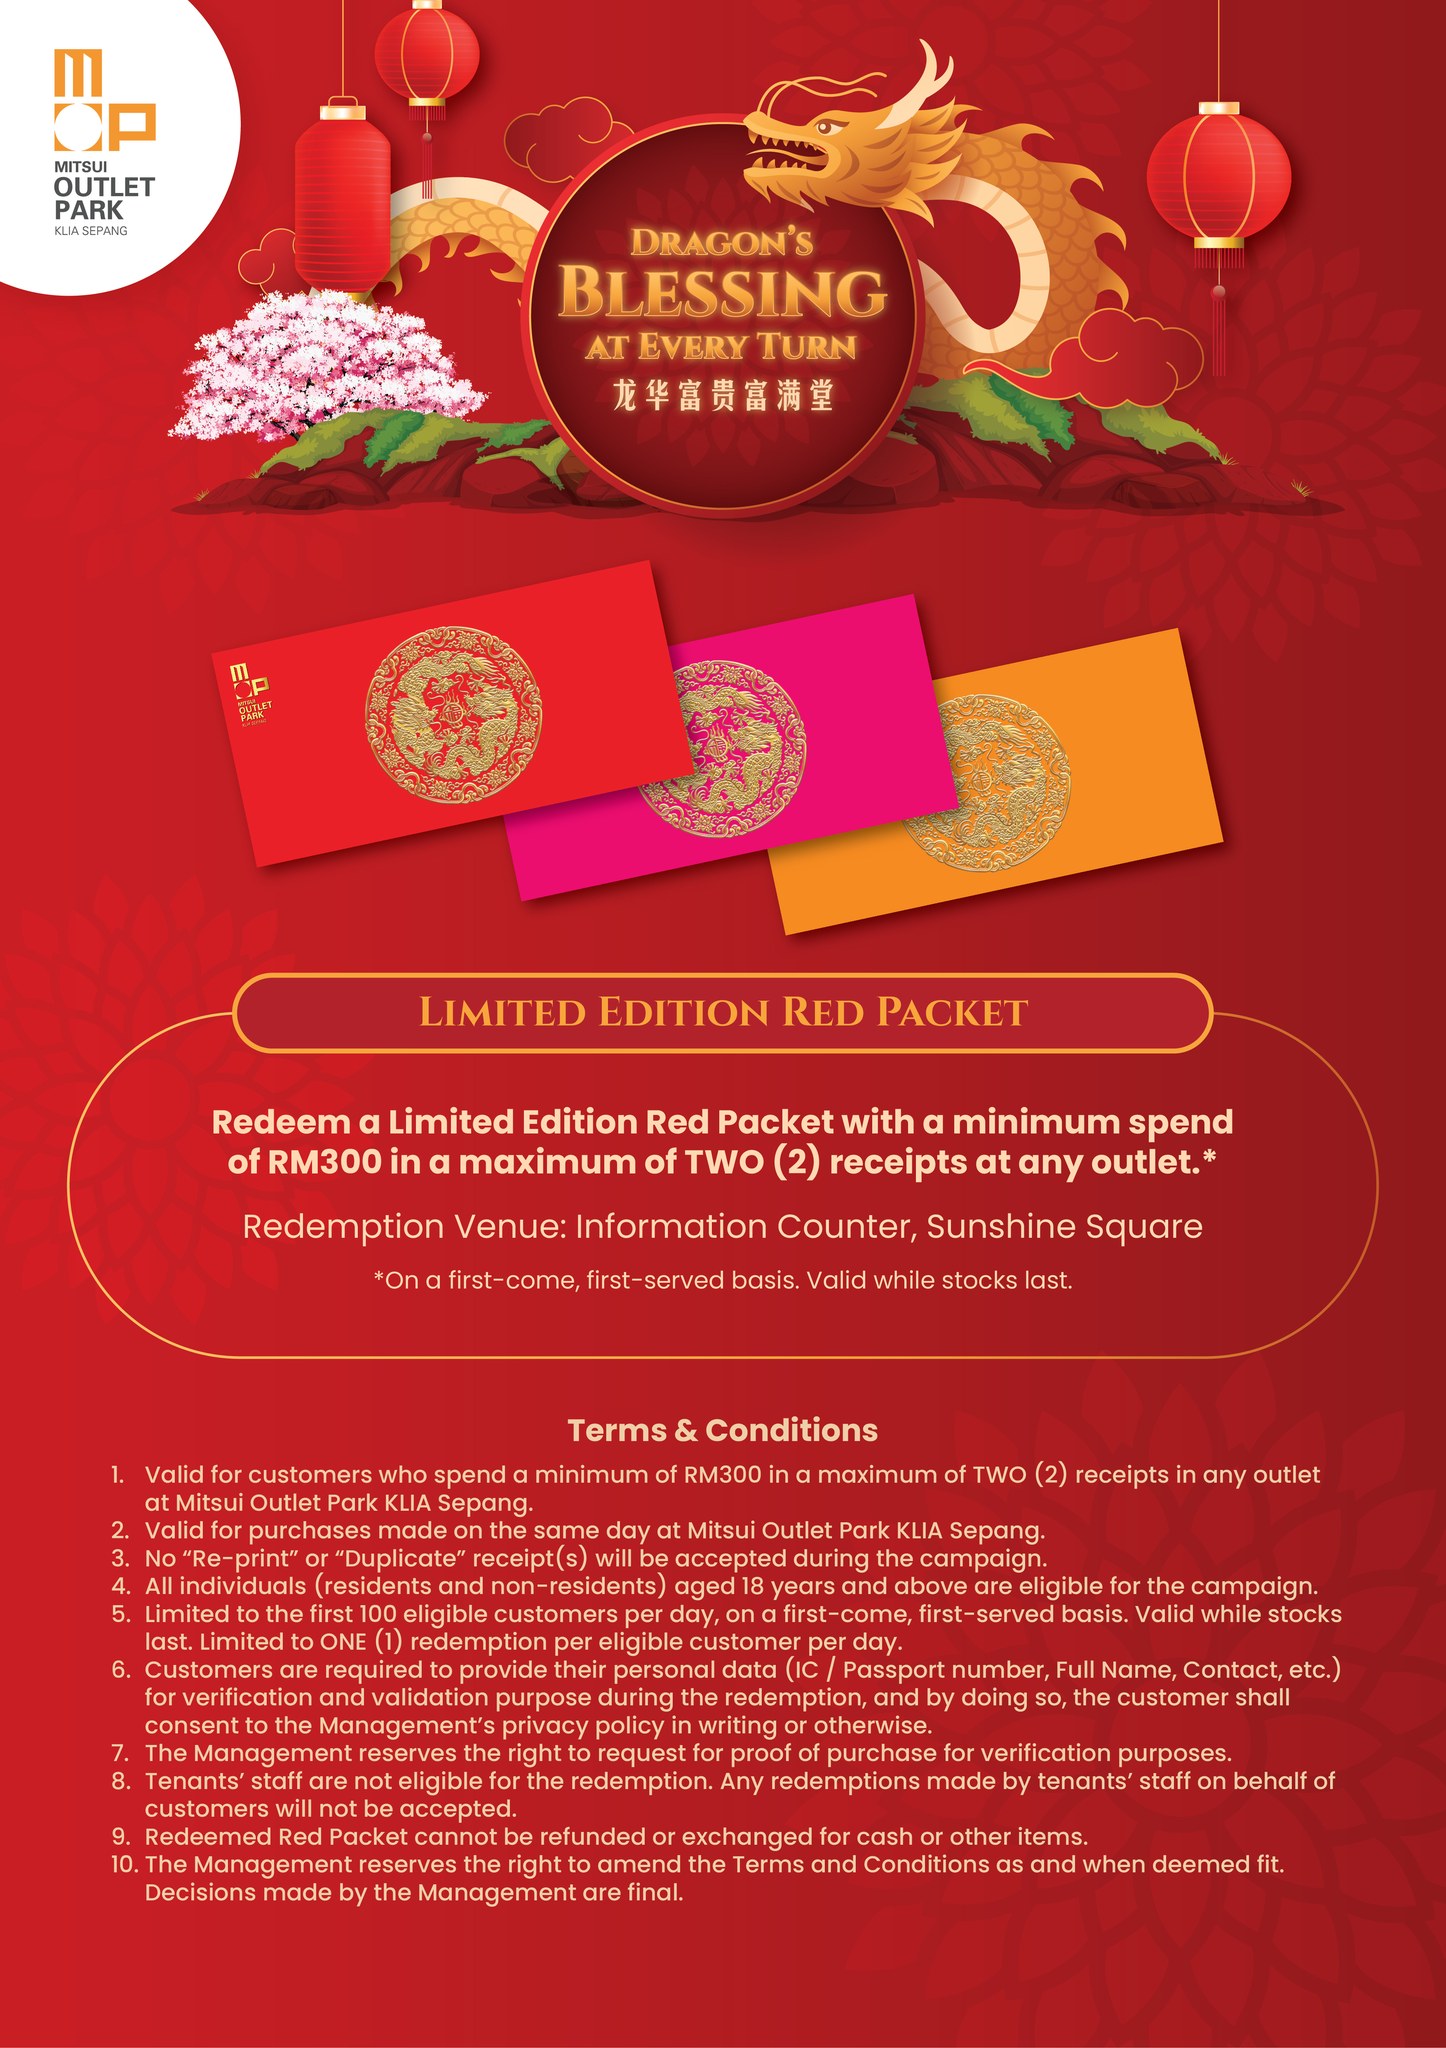 CNY RED PACKET.jpg